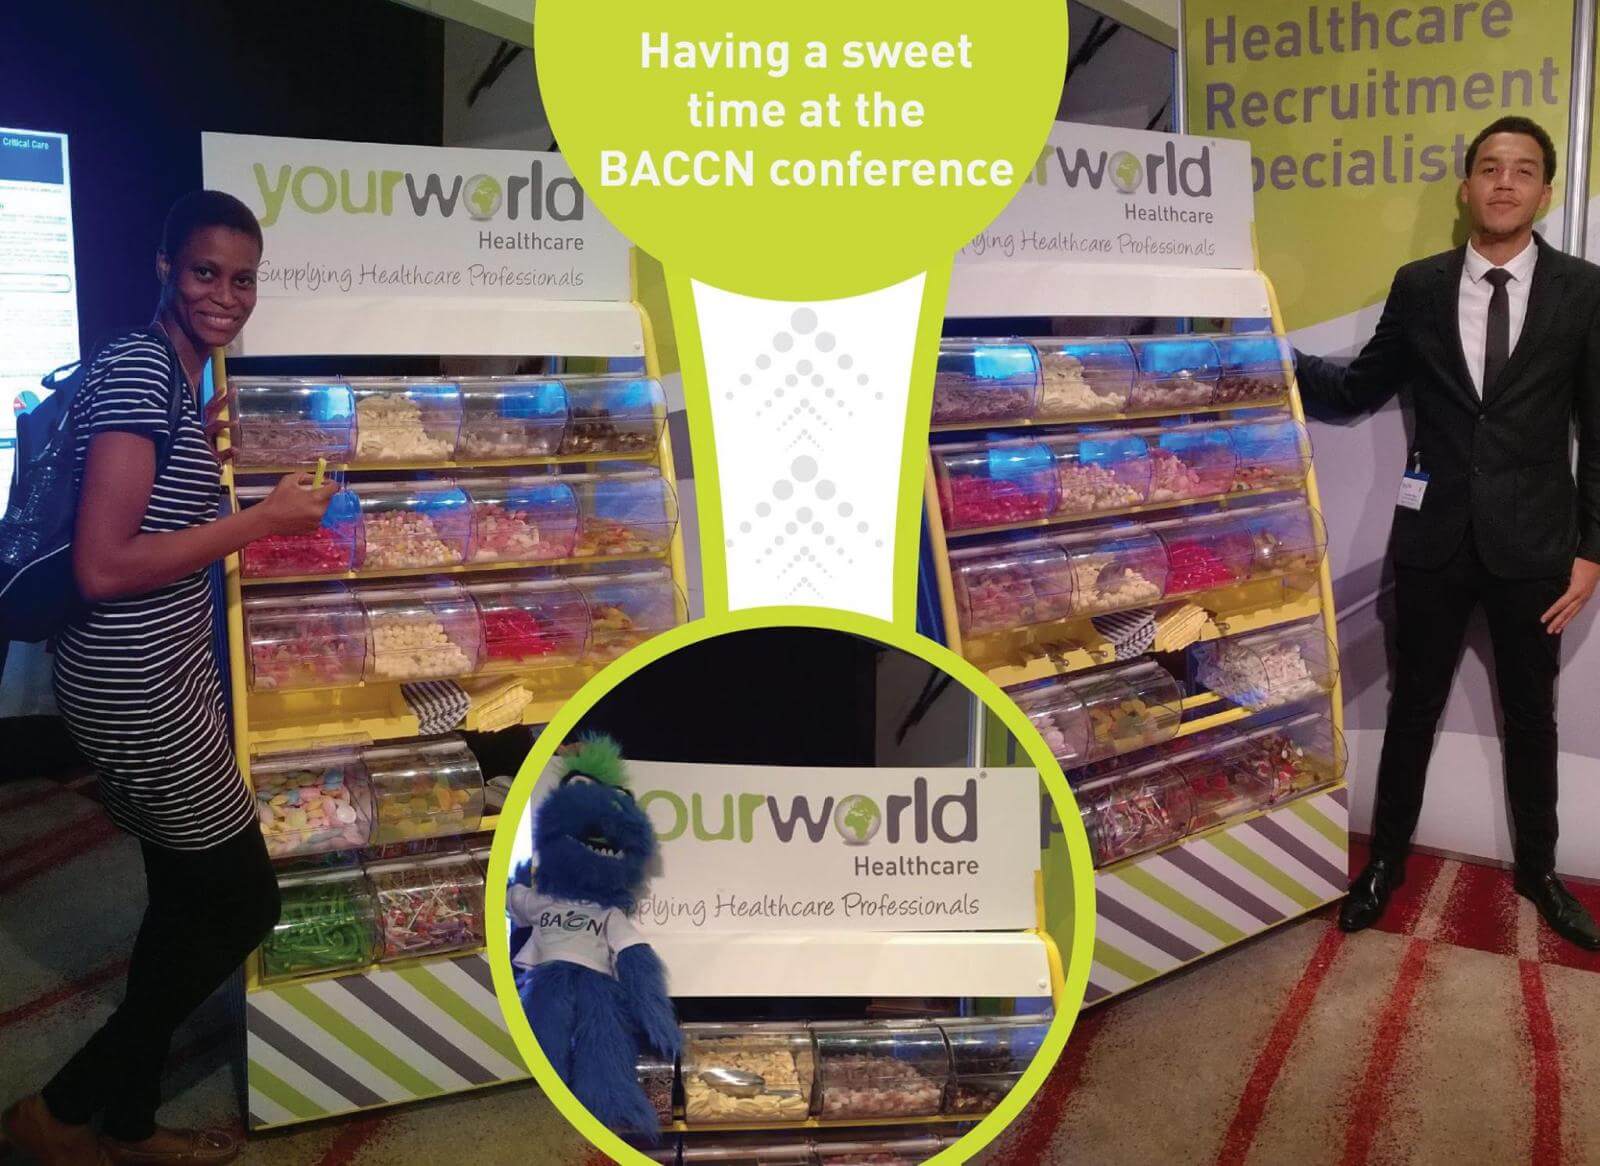 Your World Healthcare gives sweets to delegates at the BACCN conference